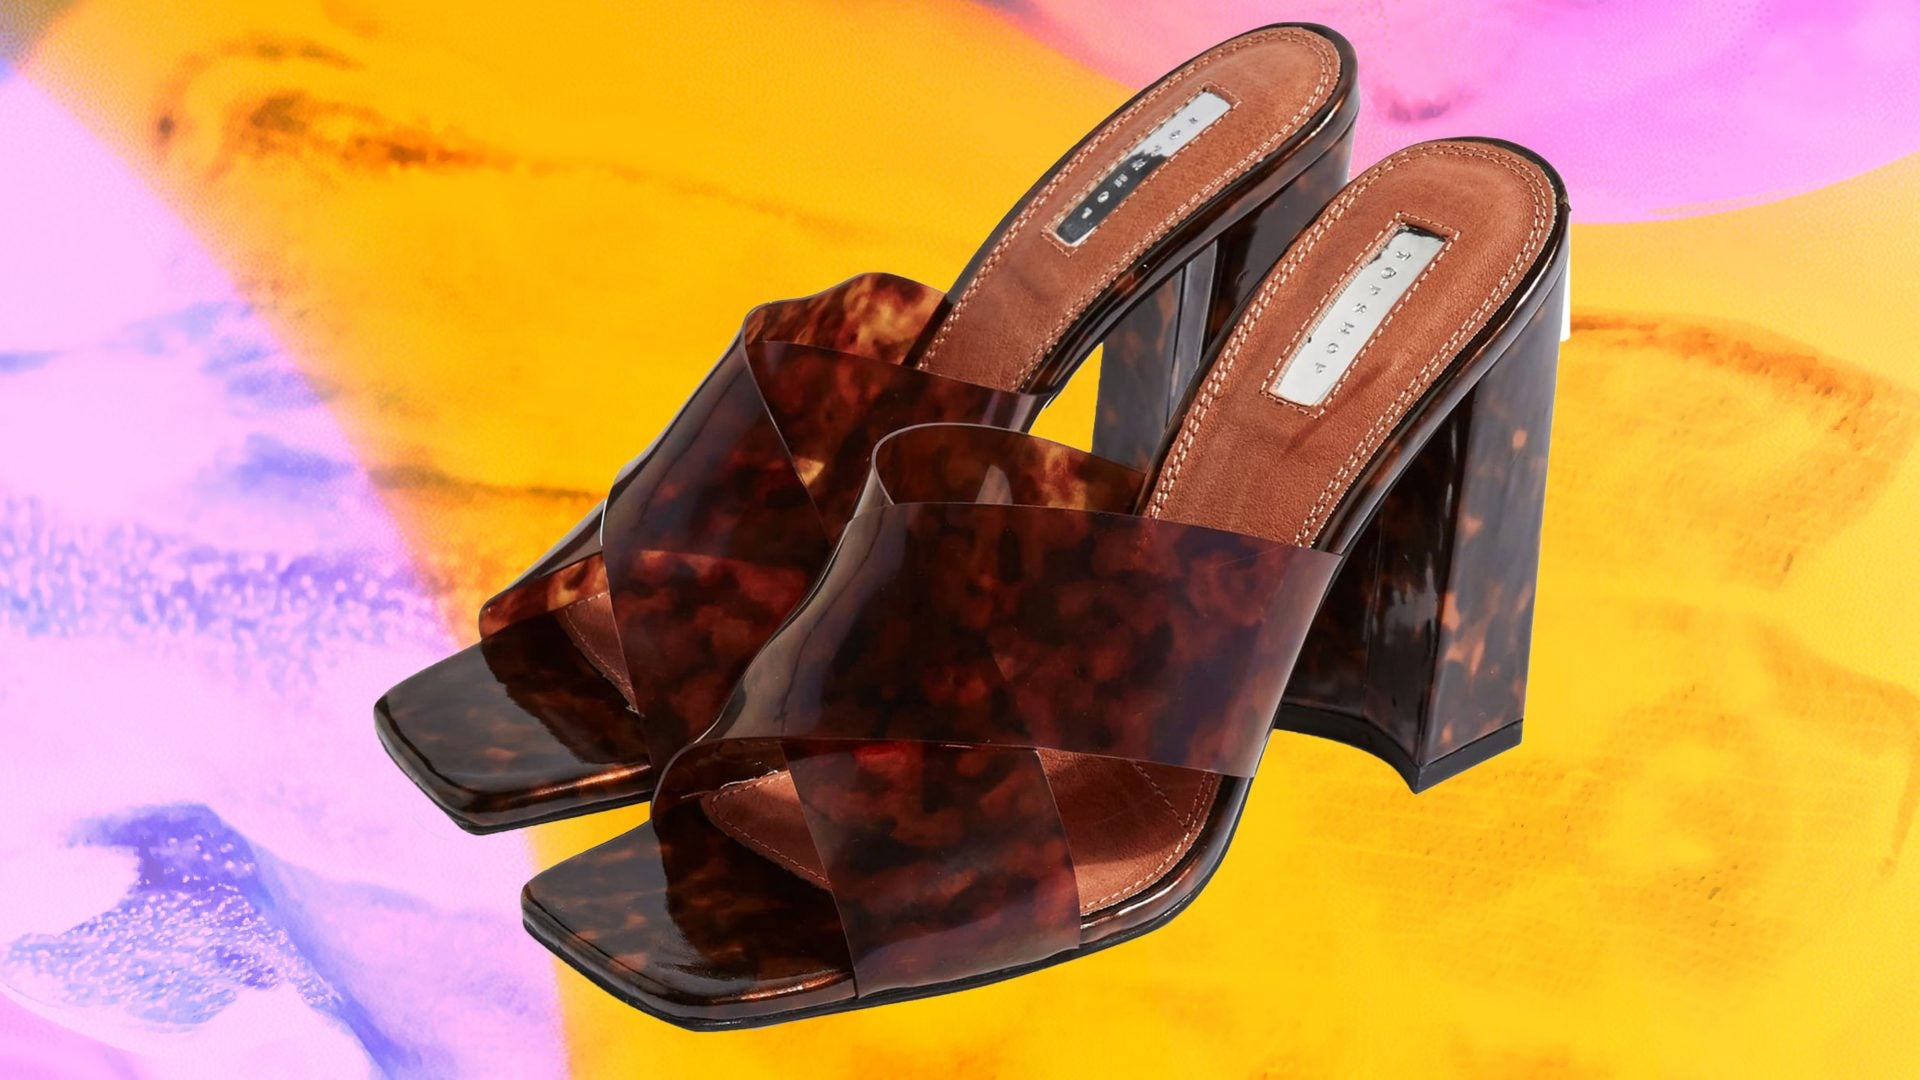 Your ESSENCE Festival Won't Be Complete Without These Statement Heels